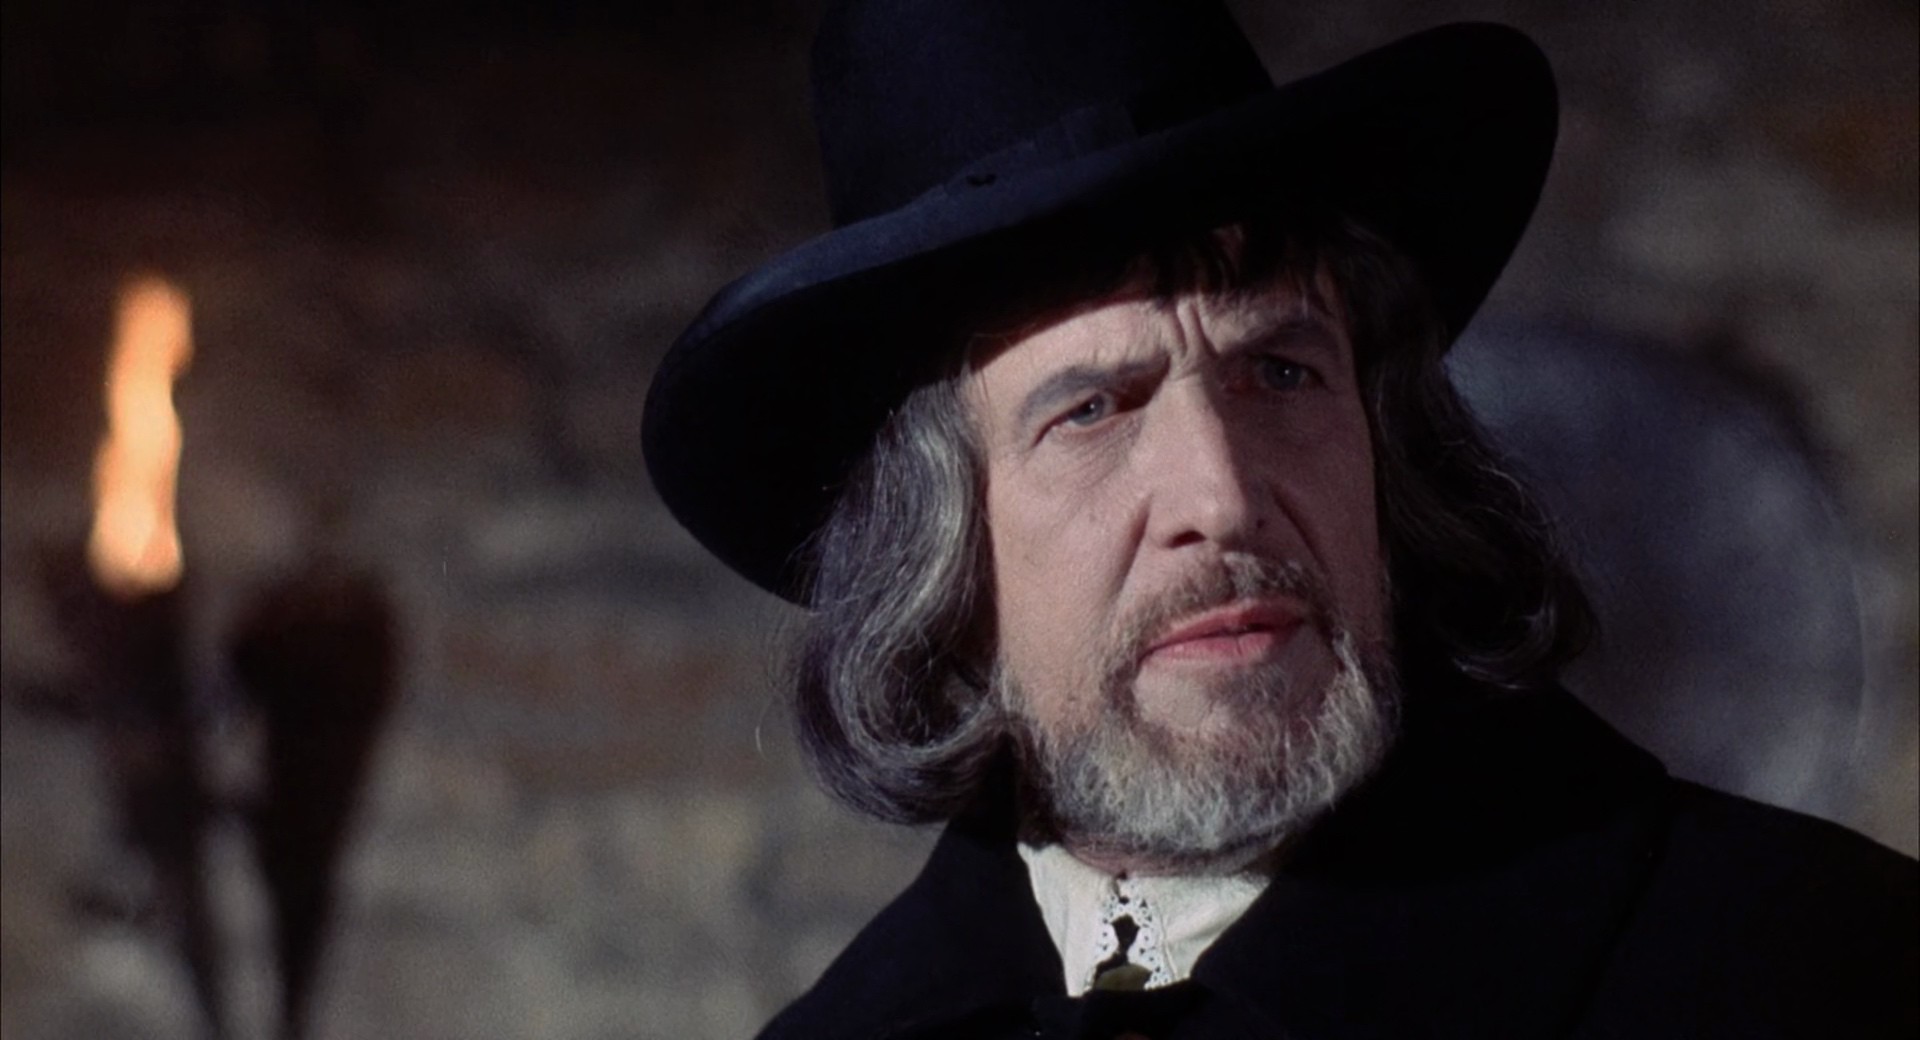 Witchfinder General 1968 aka The Conqueror Worm Shout Factory Remastered 1080p BluRay x265 HEVC 10bit AAC 2 0 Commentary Michael Reeves Vincent